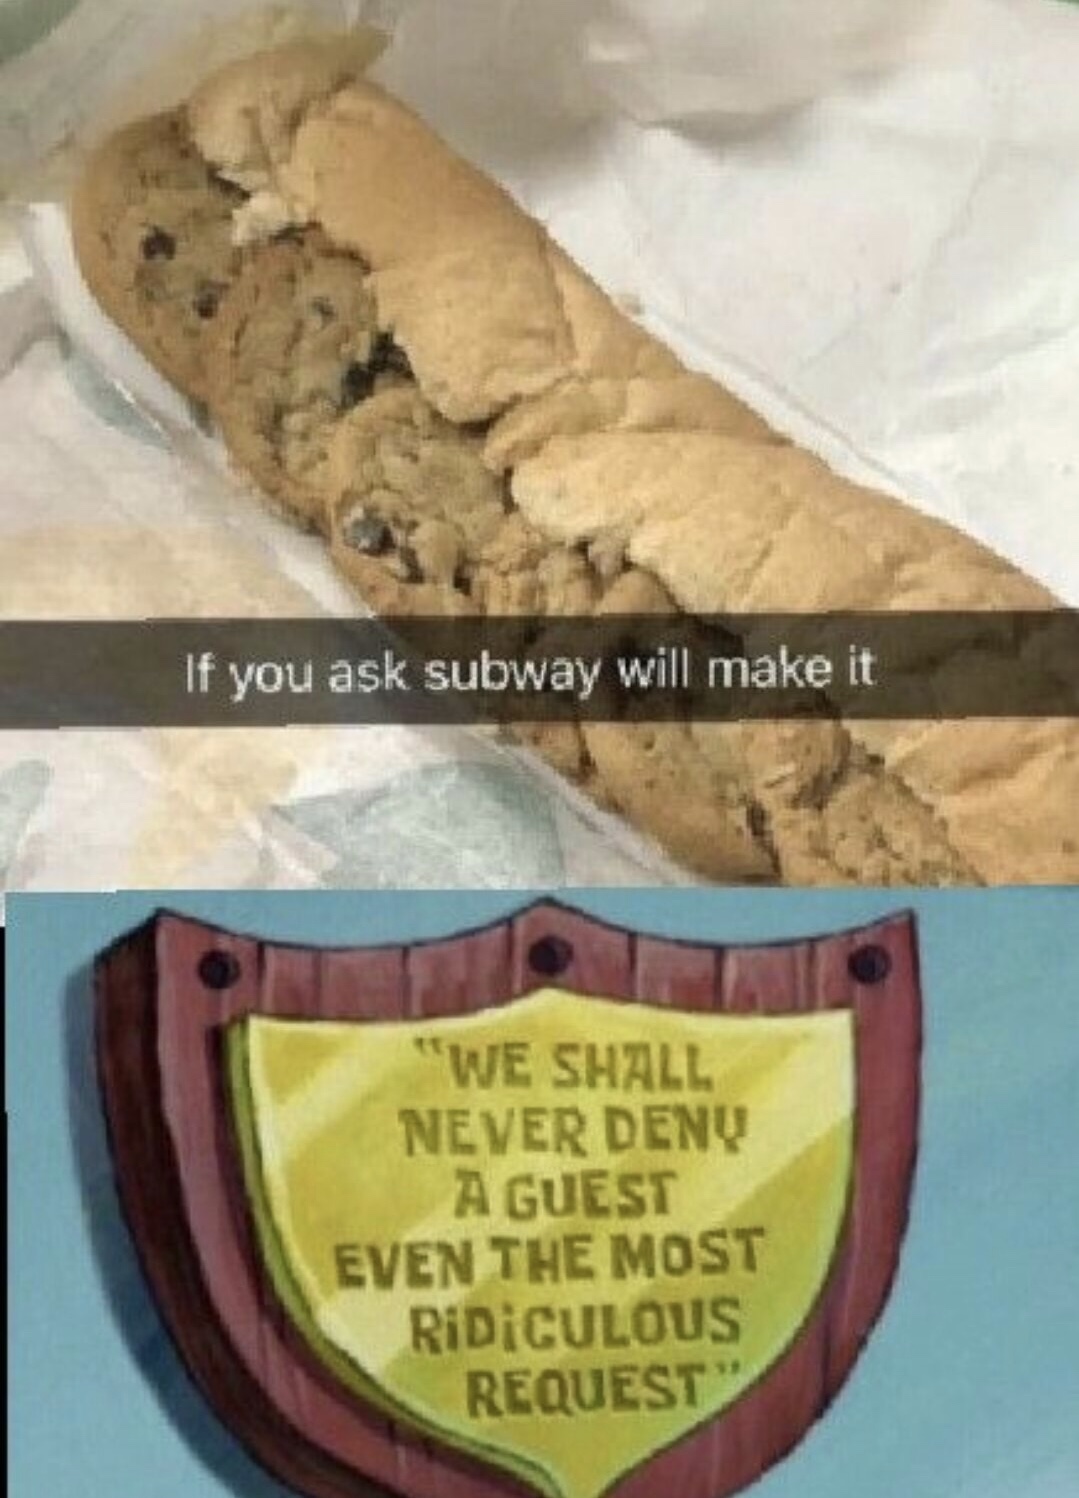 Monday meme about Subway making weird sandwiches by request